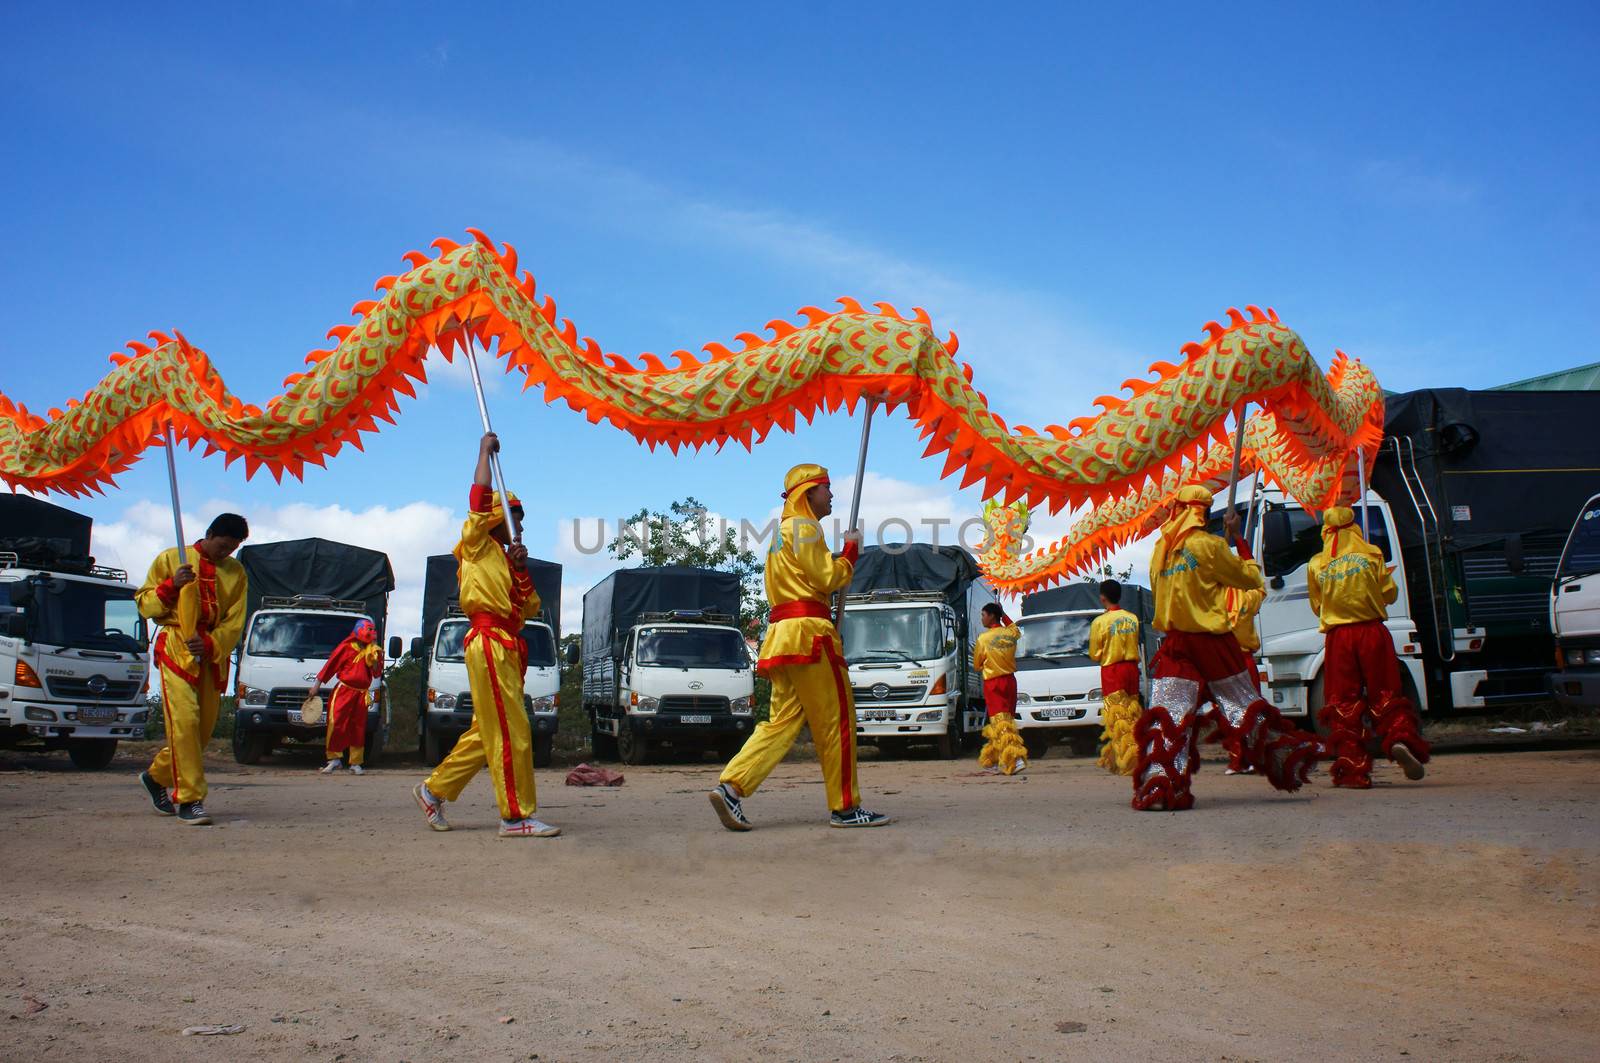 Team of people perform dragon dance by xuanhuongho